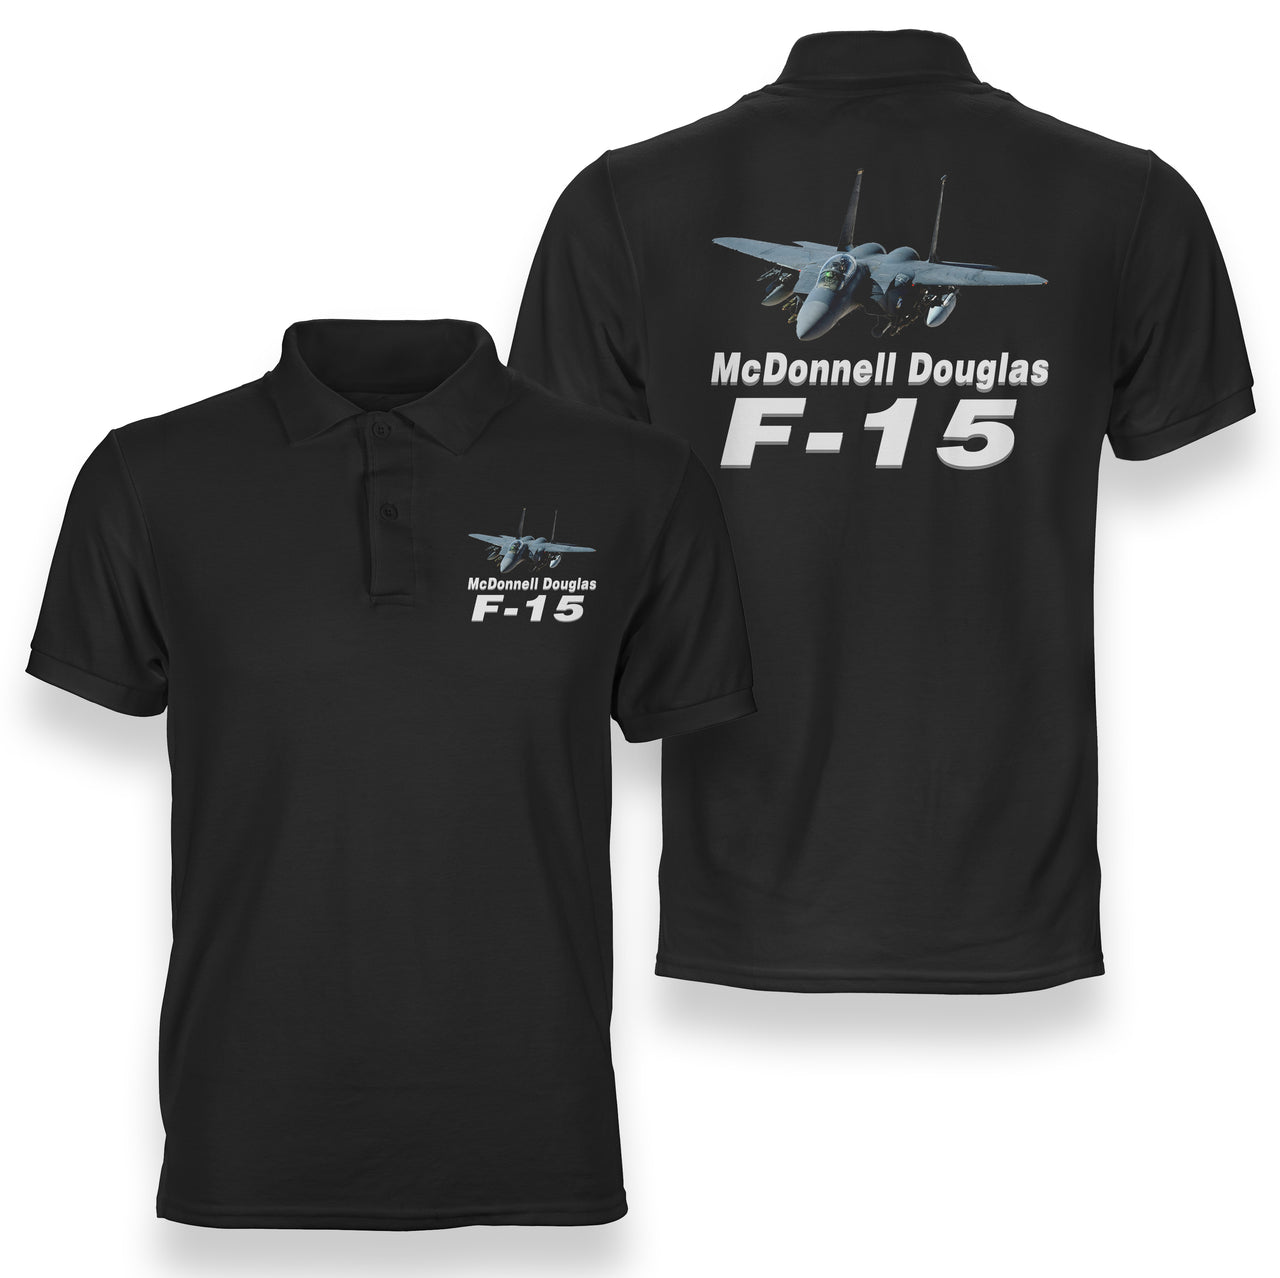 The McDonnell Douglas F15 Designed Double Side Polo T-Shirts